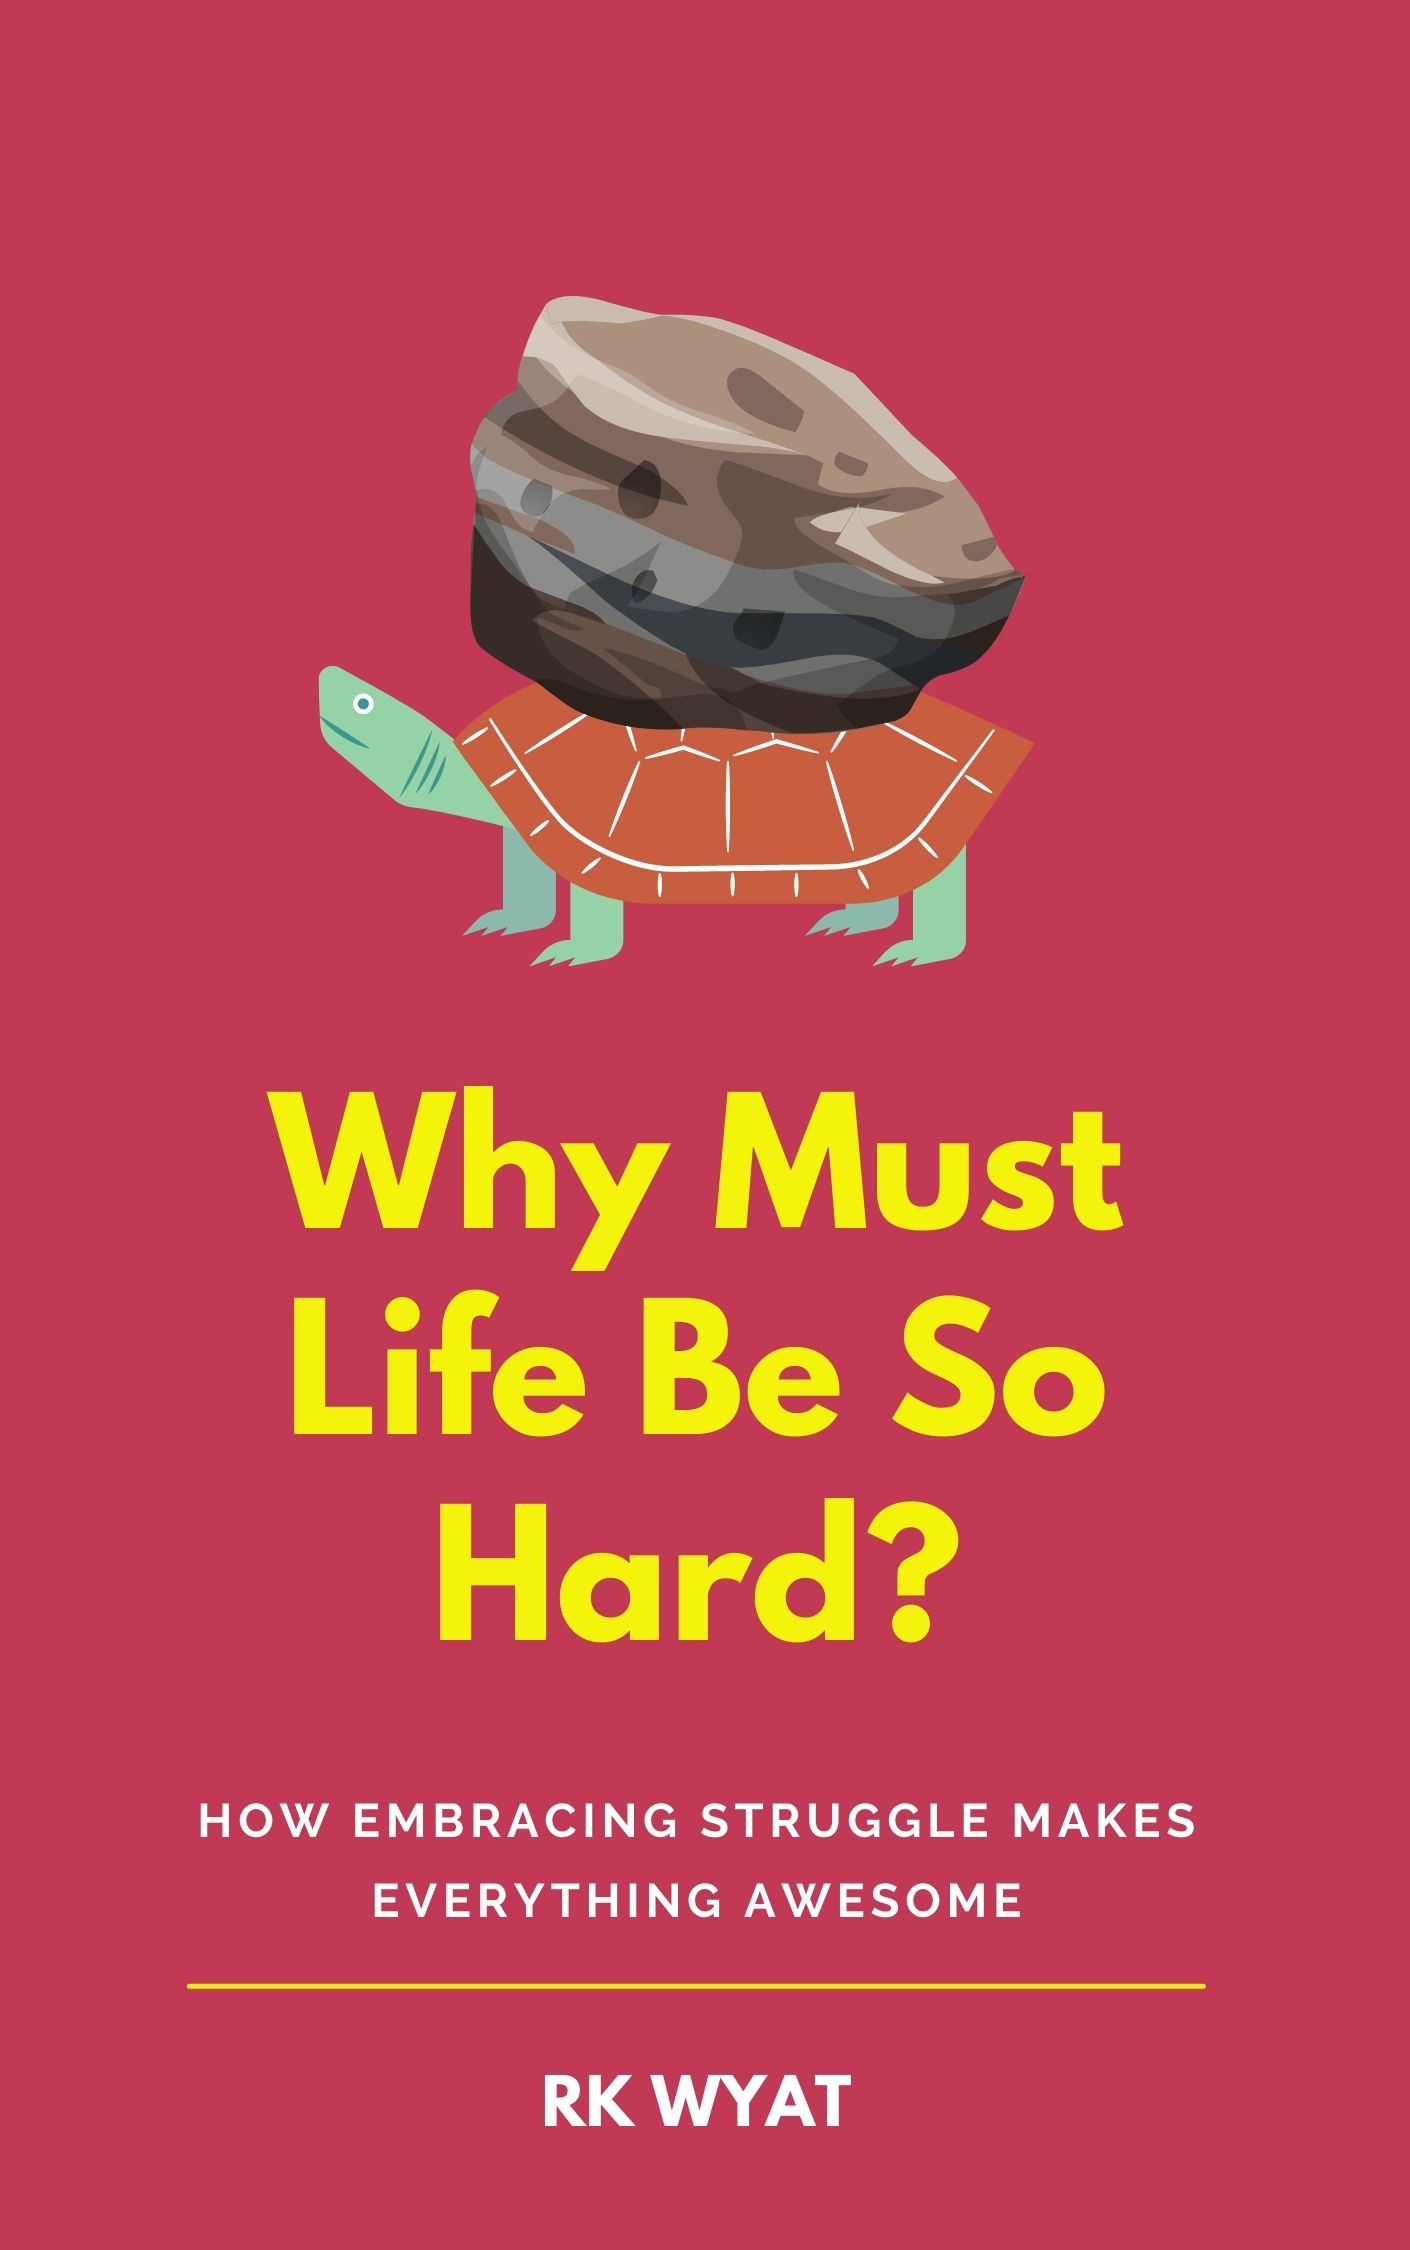 RK Wyat: Why Must Life Be So Hard?